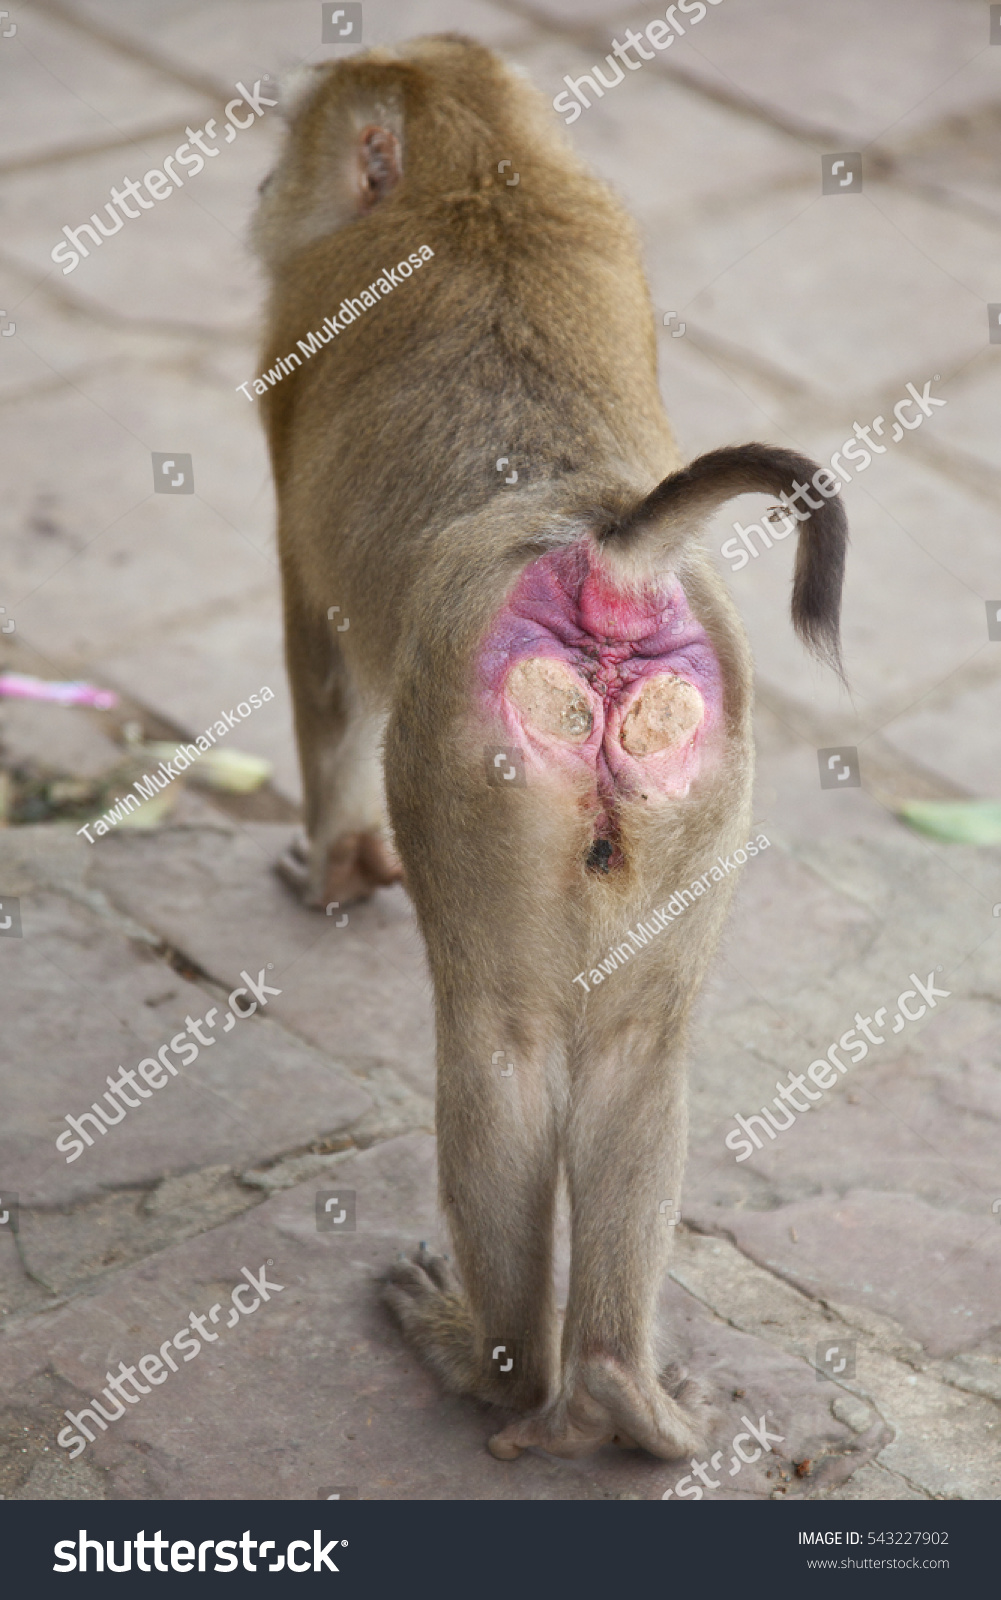 stock-photo-monkey-showing-red-ass-543227902.jpg